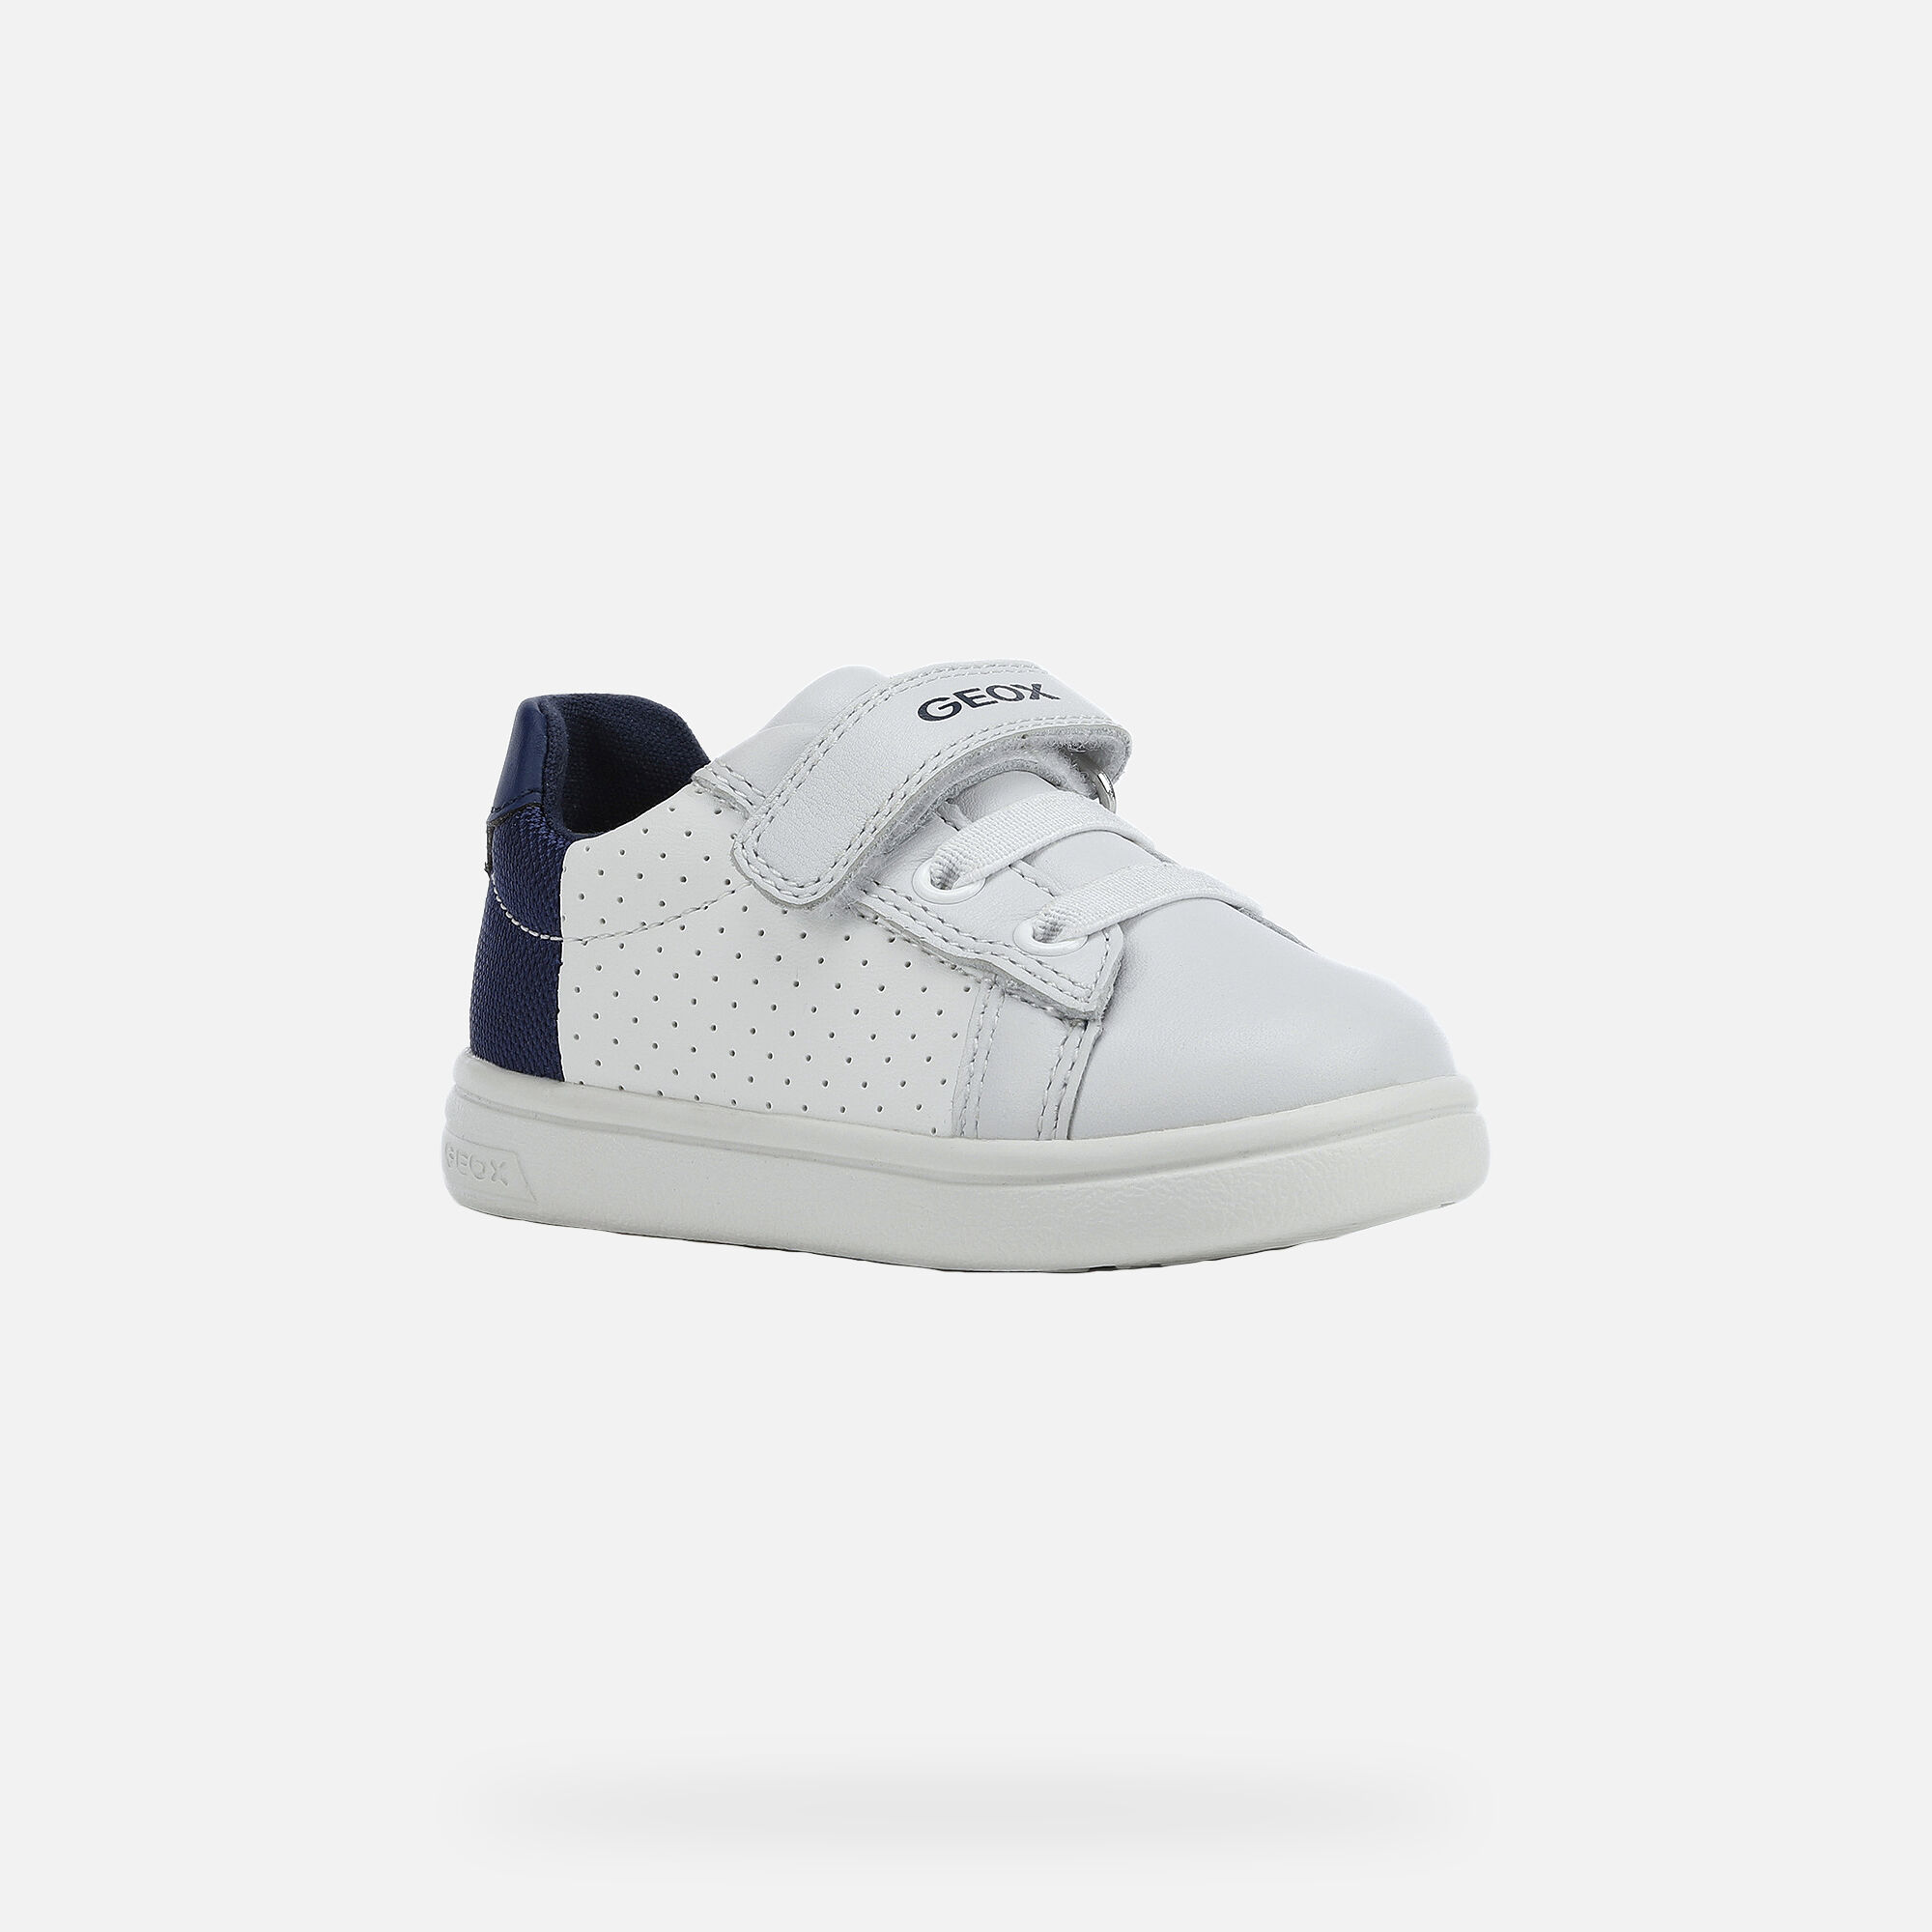 baby white sneakers